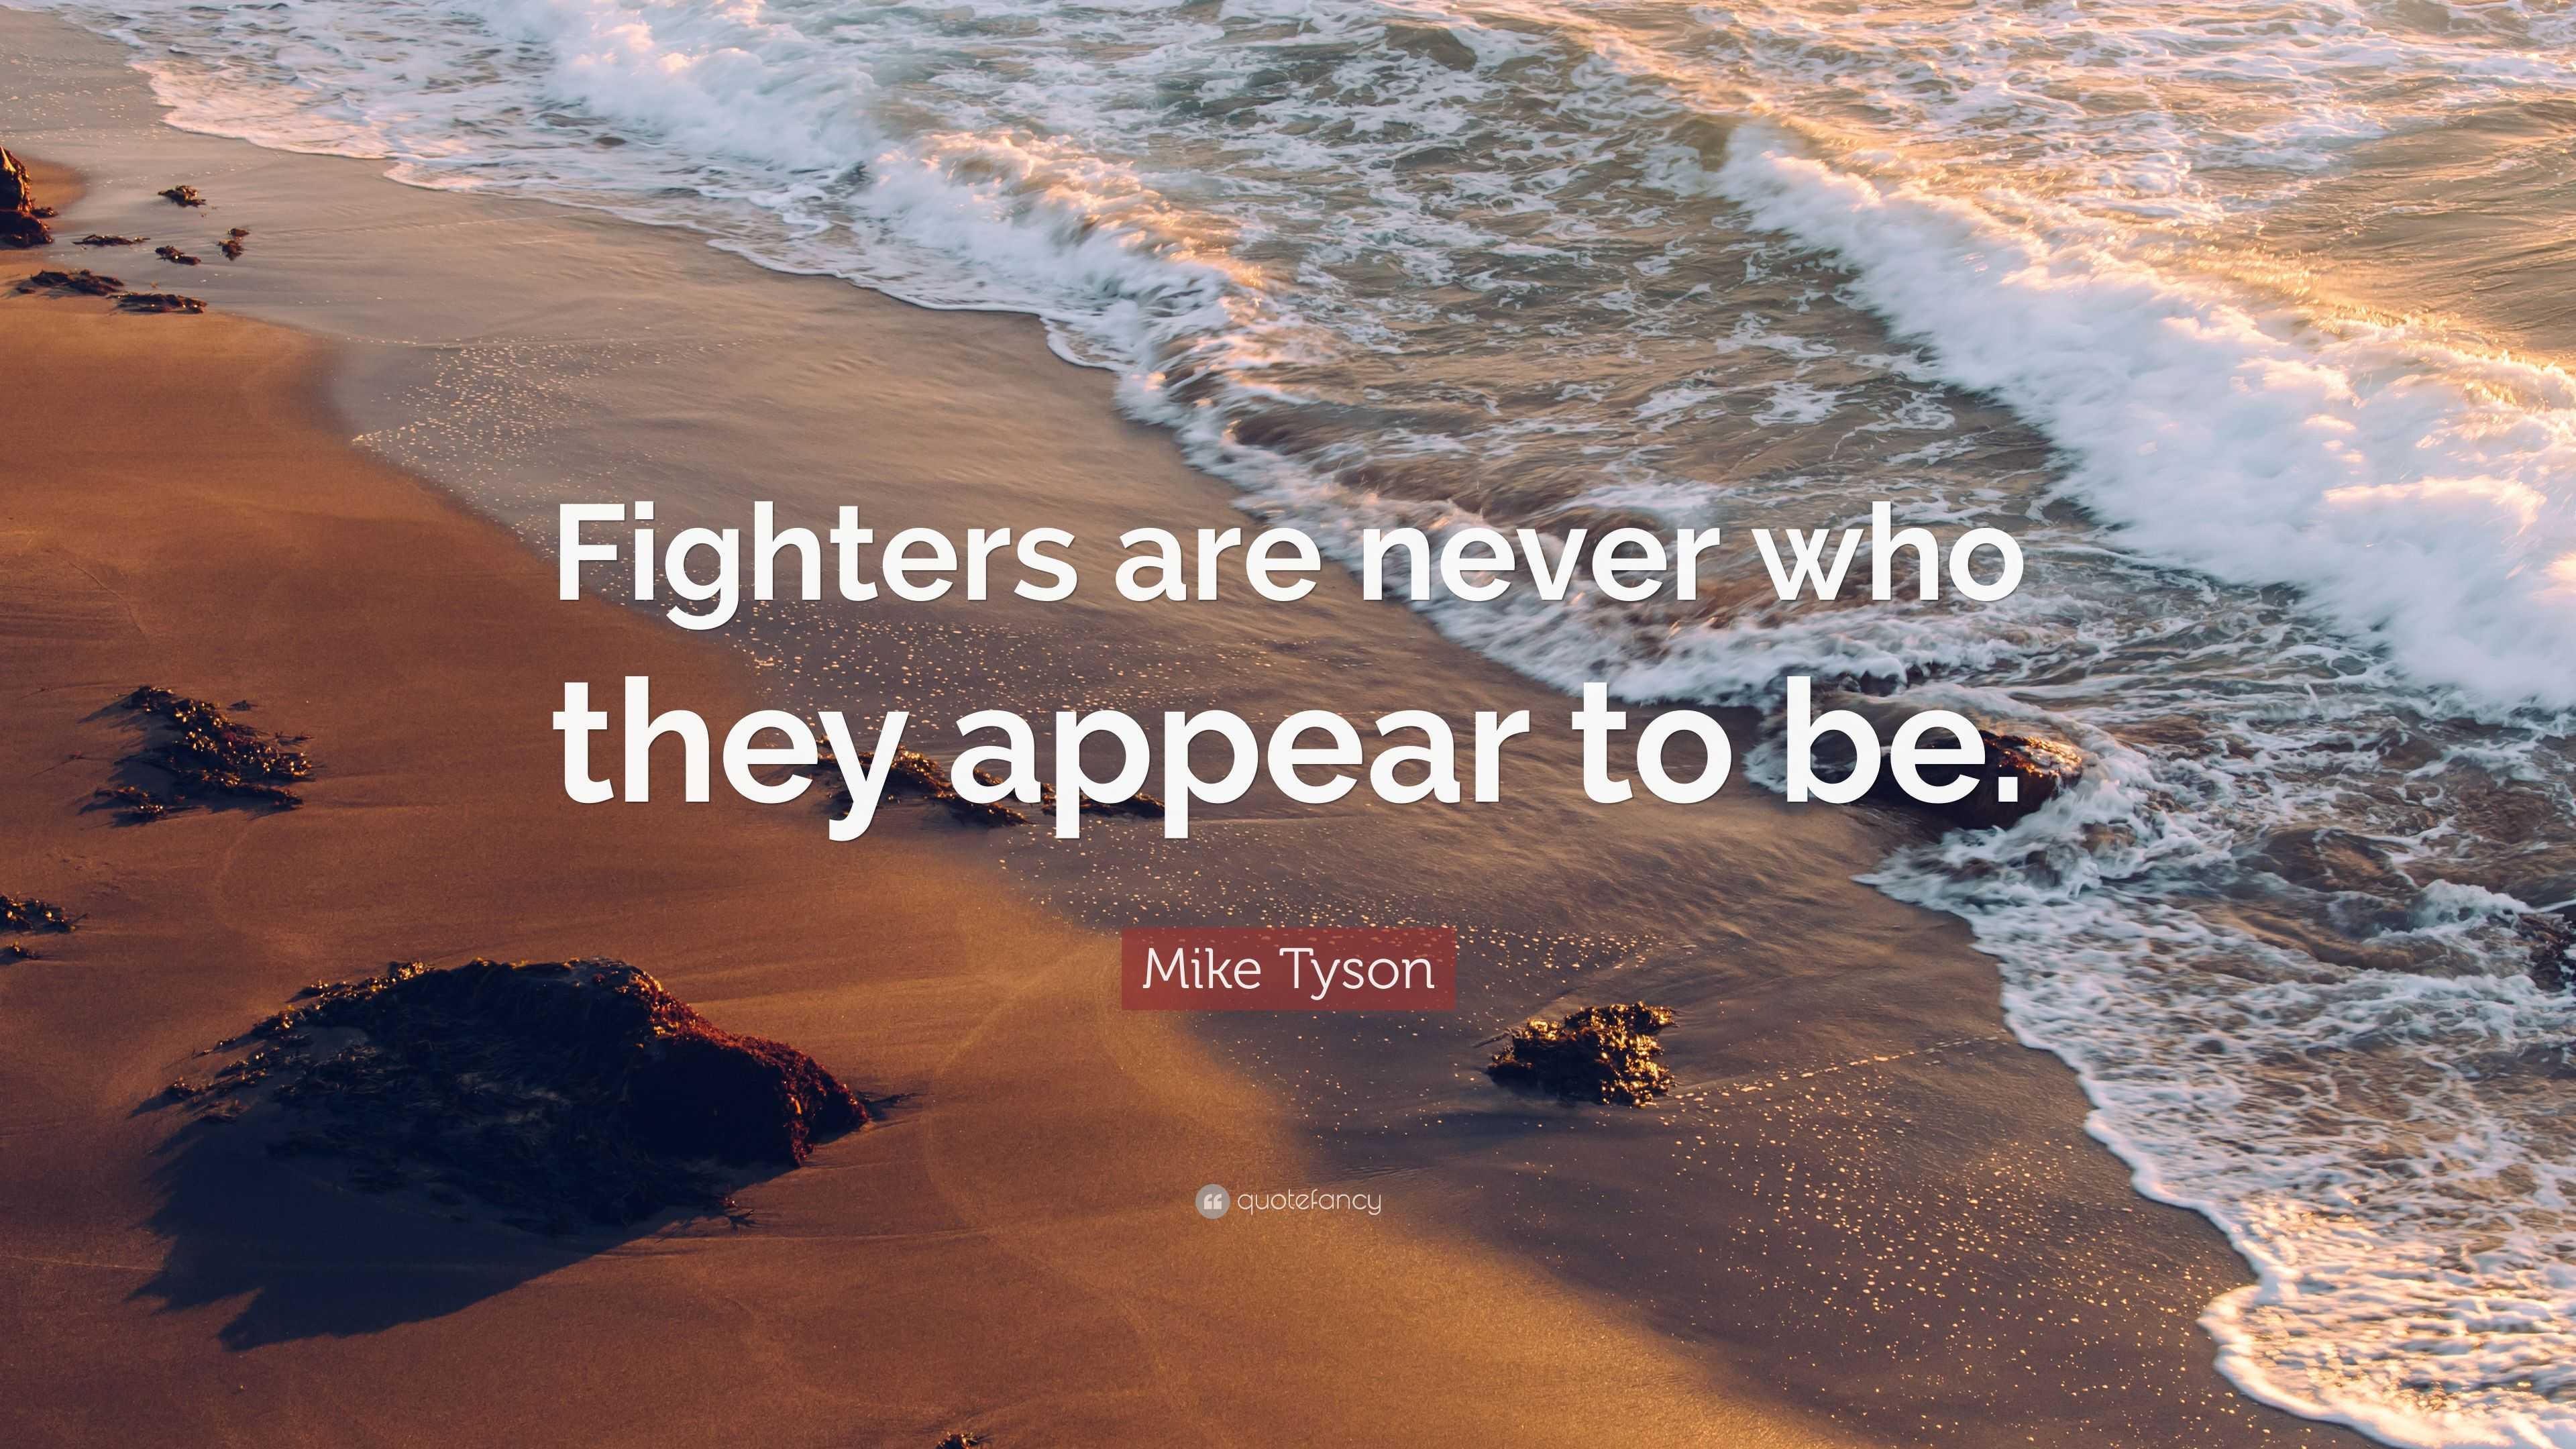 Mike Tyson Quote: “Fighters are never who they appear to be.”